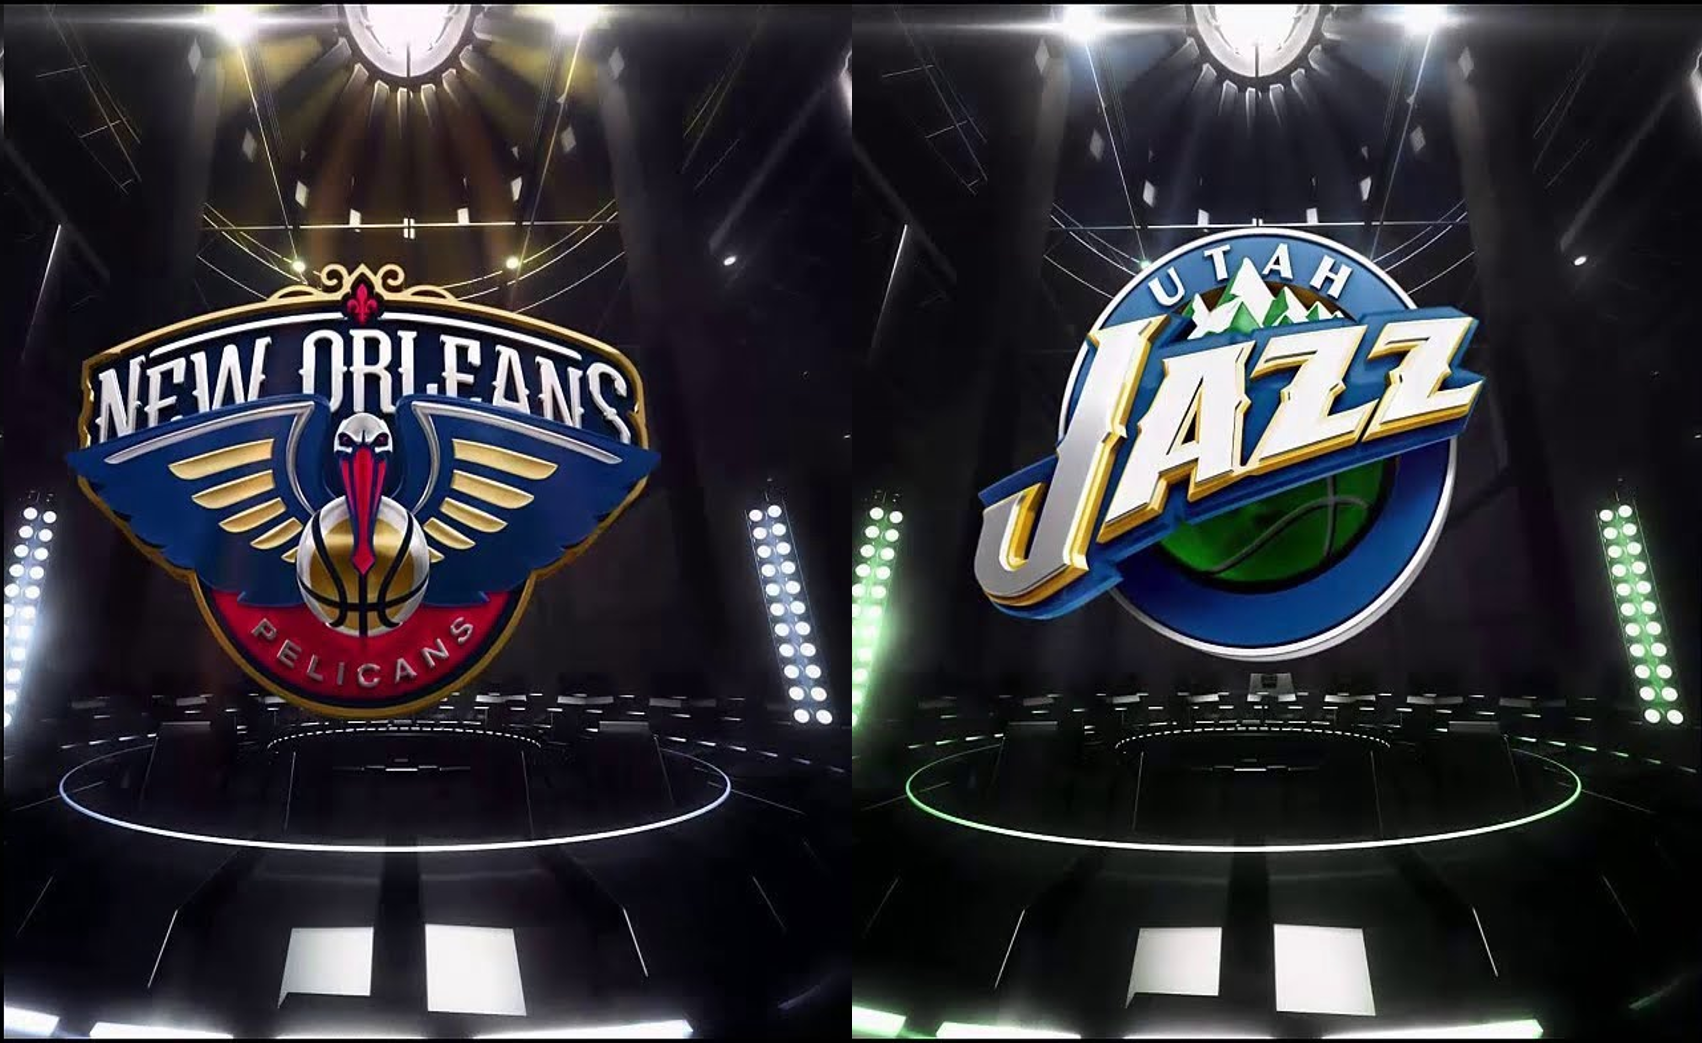 New Orleans Pelicans Vs Utah Jazz-Game Day Preview: 01.19.2021